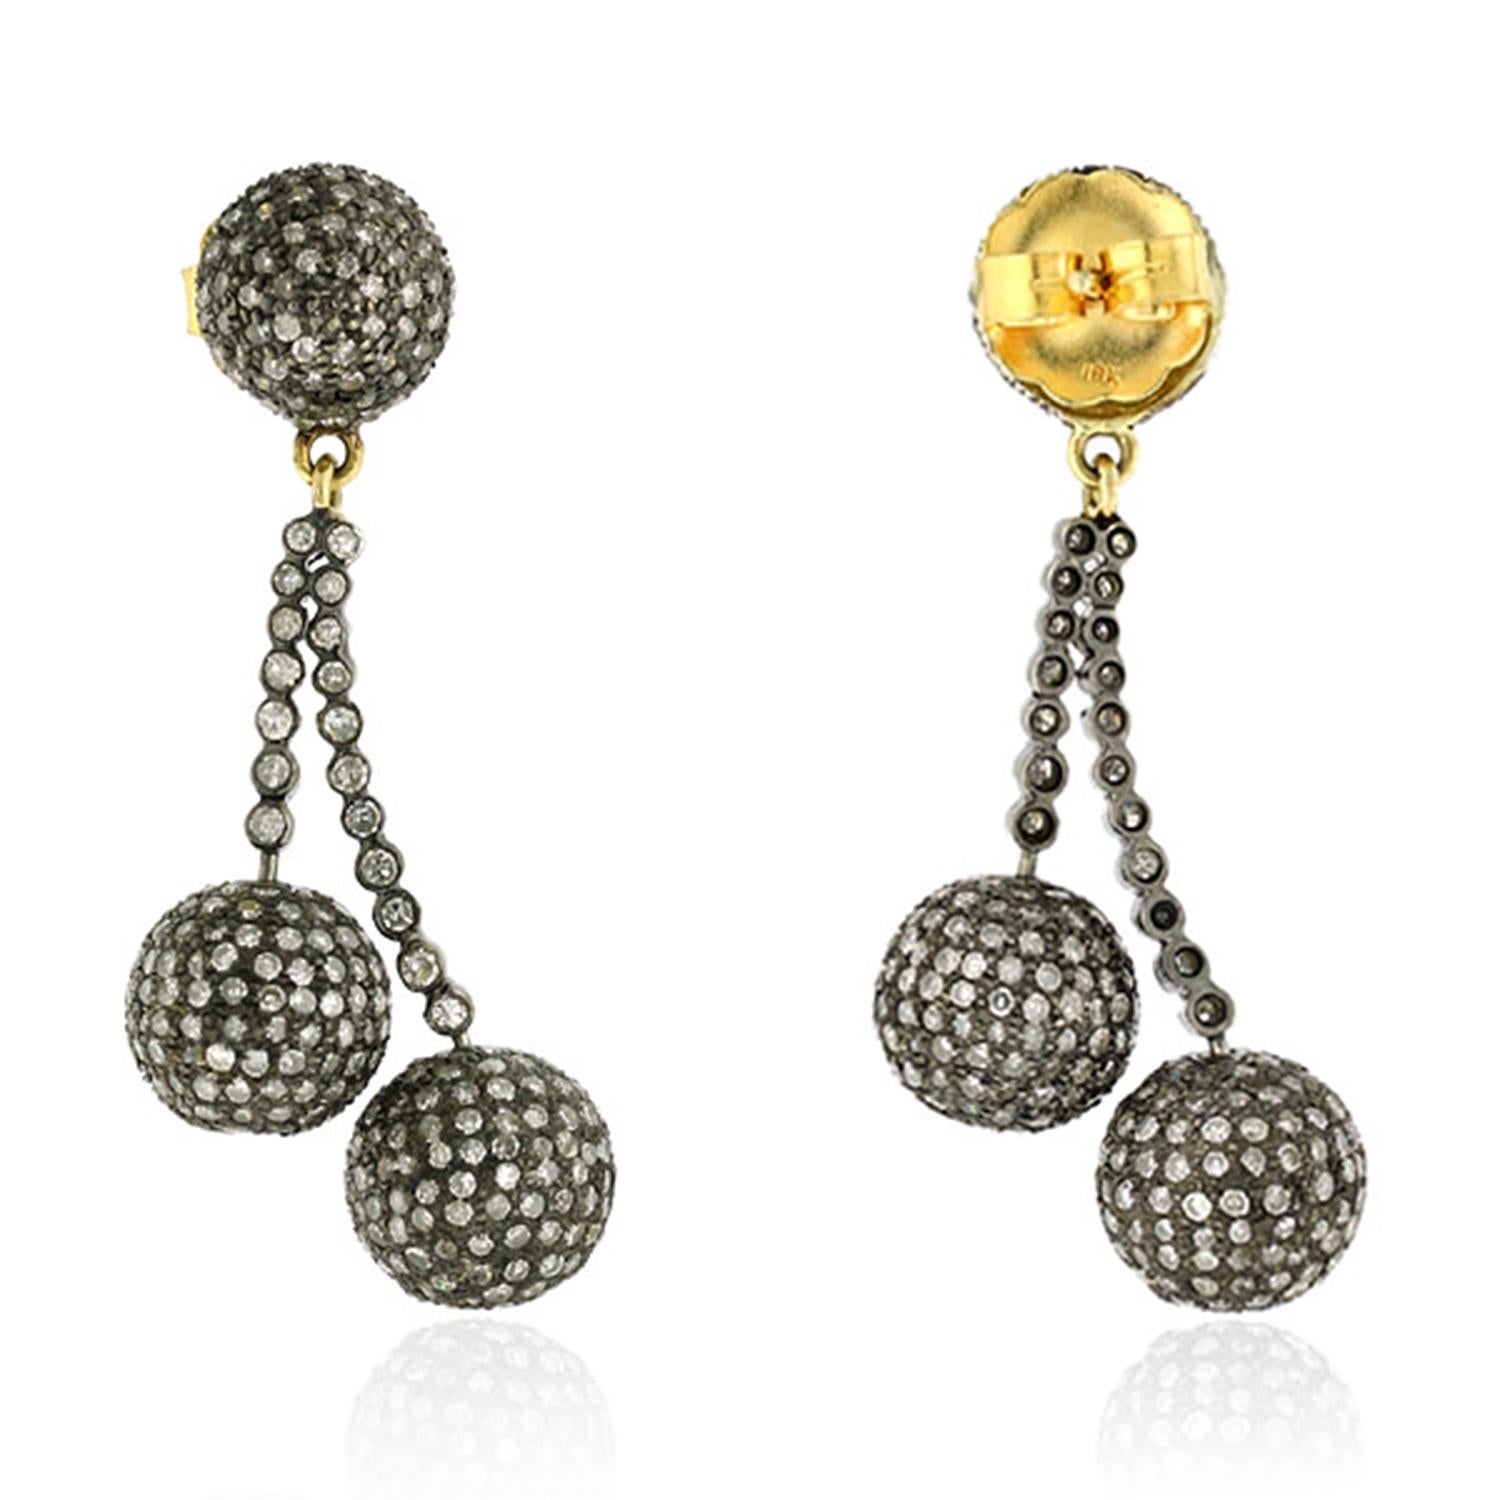 Art Deco Pave Diamond Ball bead Earrings Made In 18k yellow Gold For Sale